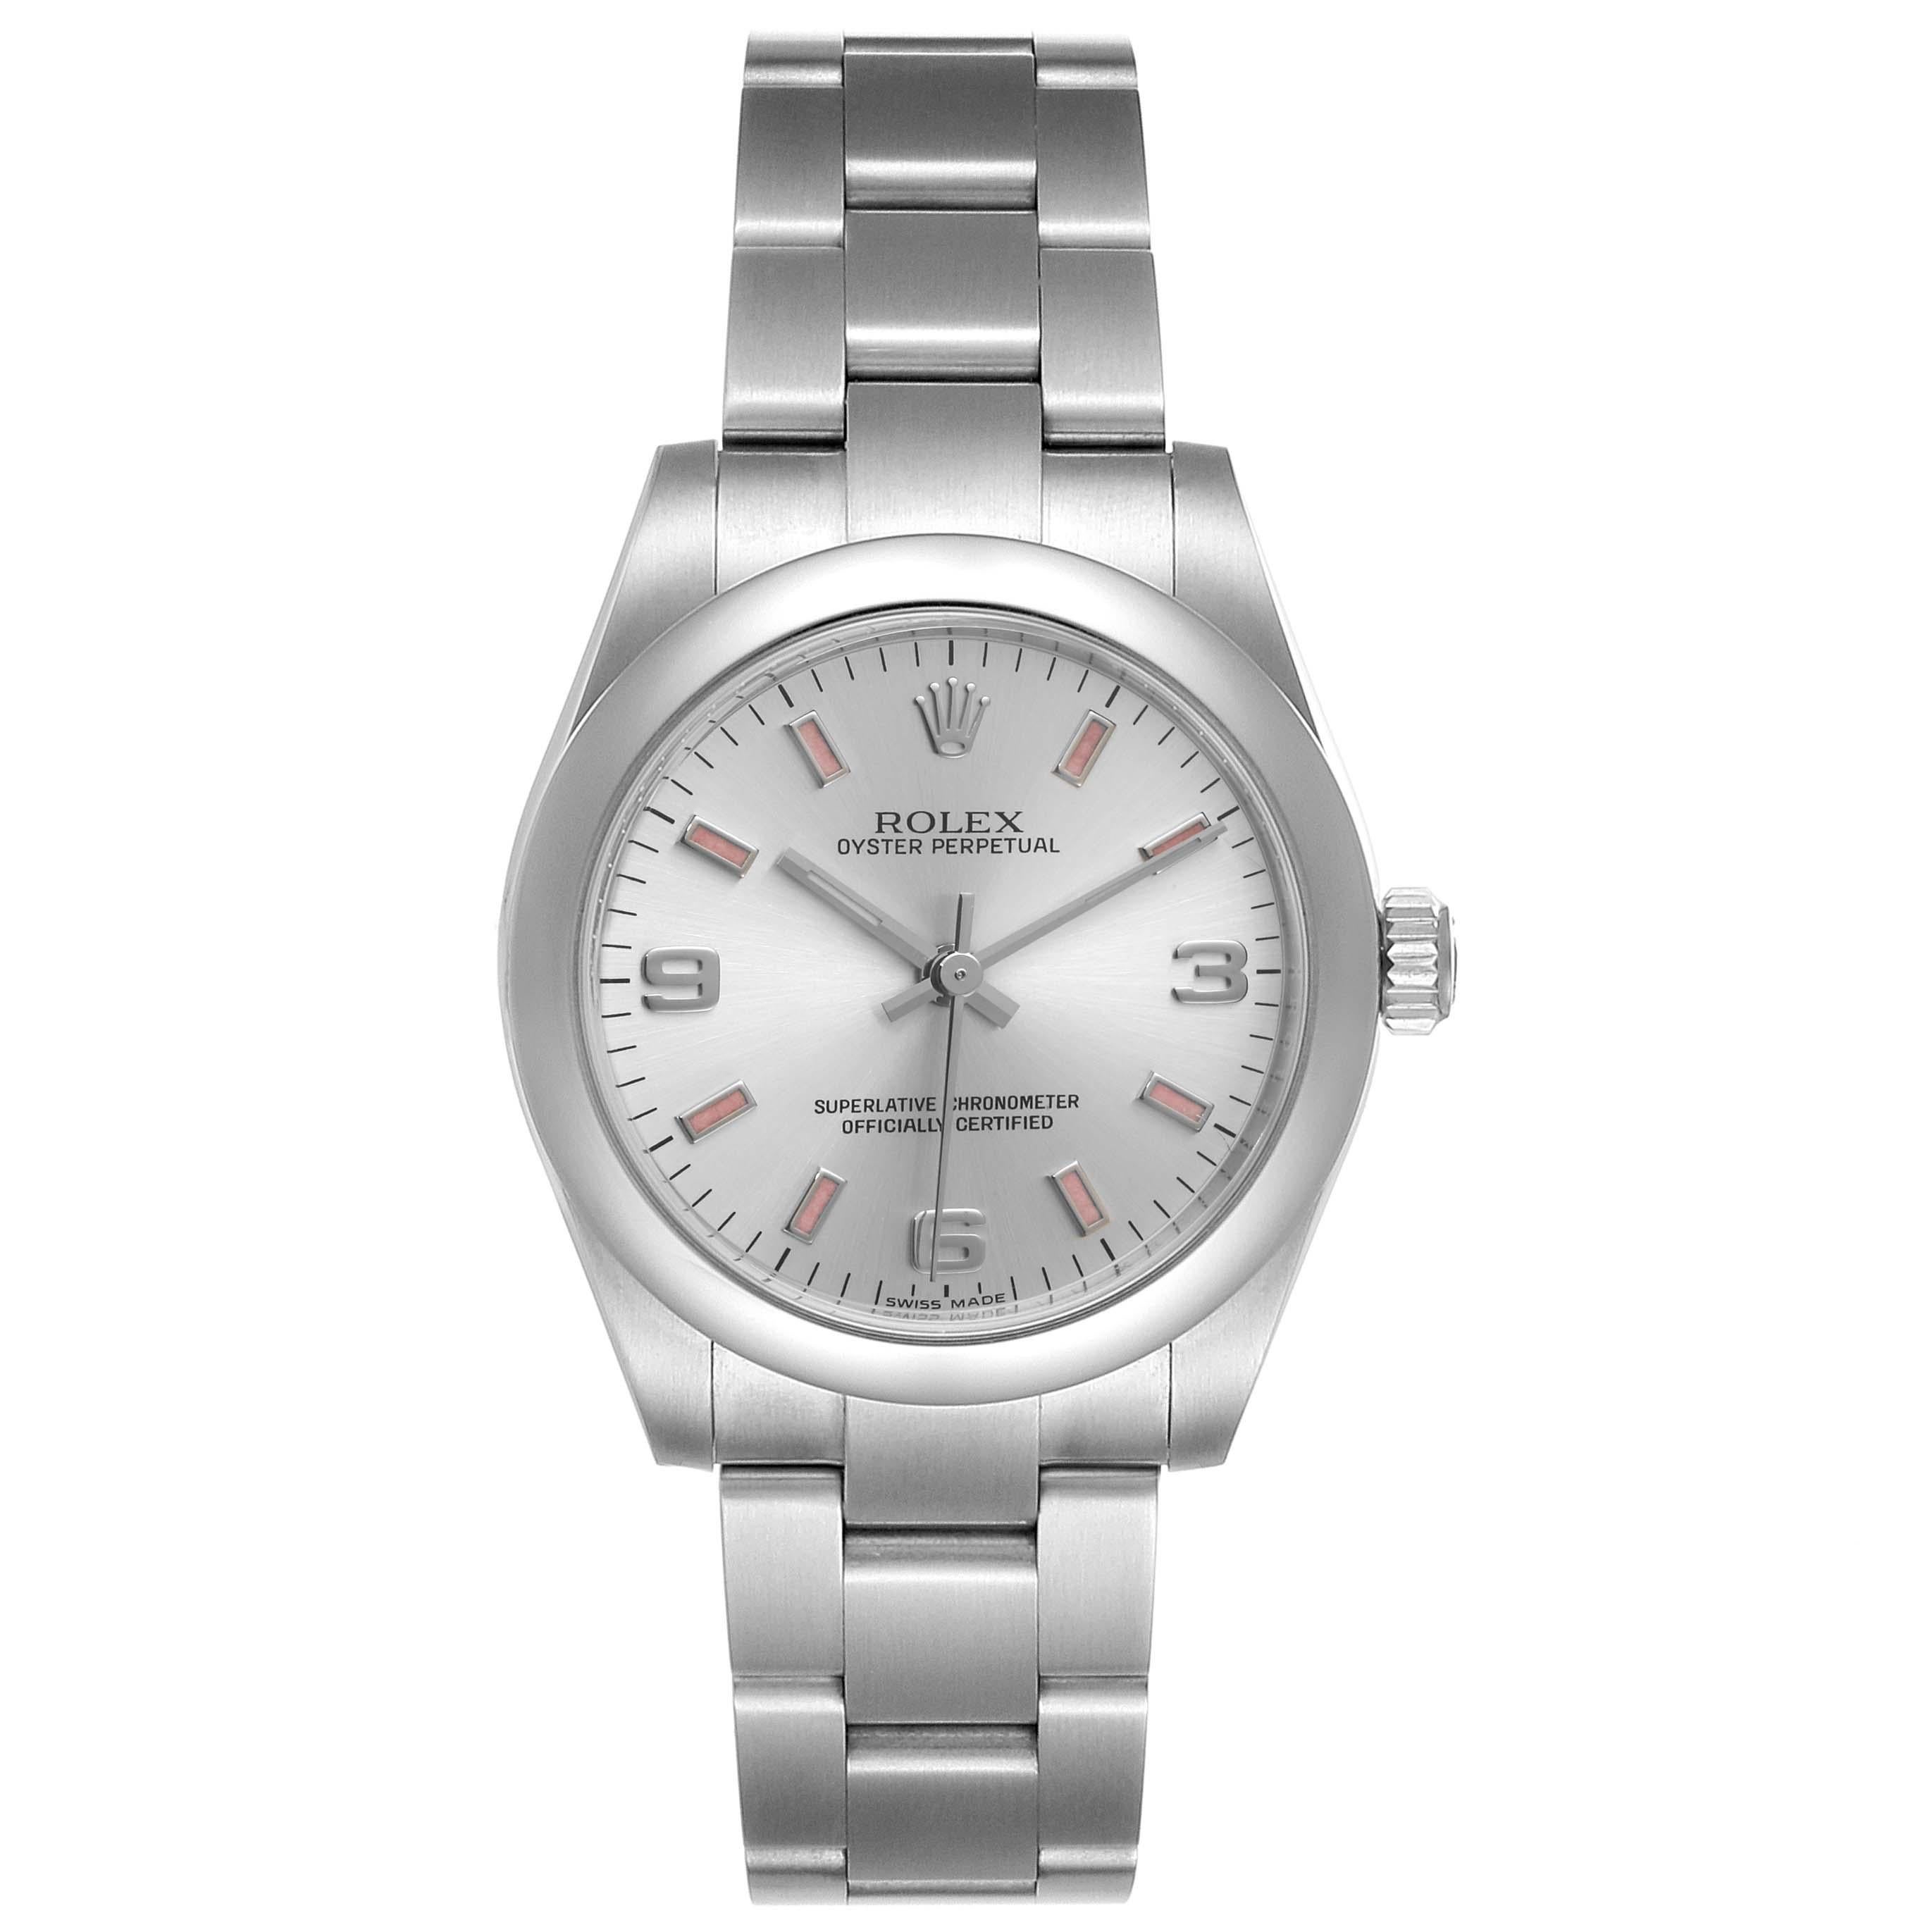 Rolex Midsize Silver Dial Pink Hour Markers Ladies Watch 177200. Officially certified chronometer self-winding movement with quickset date function. Stainless steel oyster case 31.0 mm in diameter. Rolex logo on a crown. Stainless steel smooth